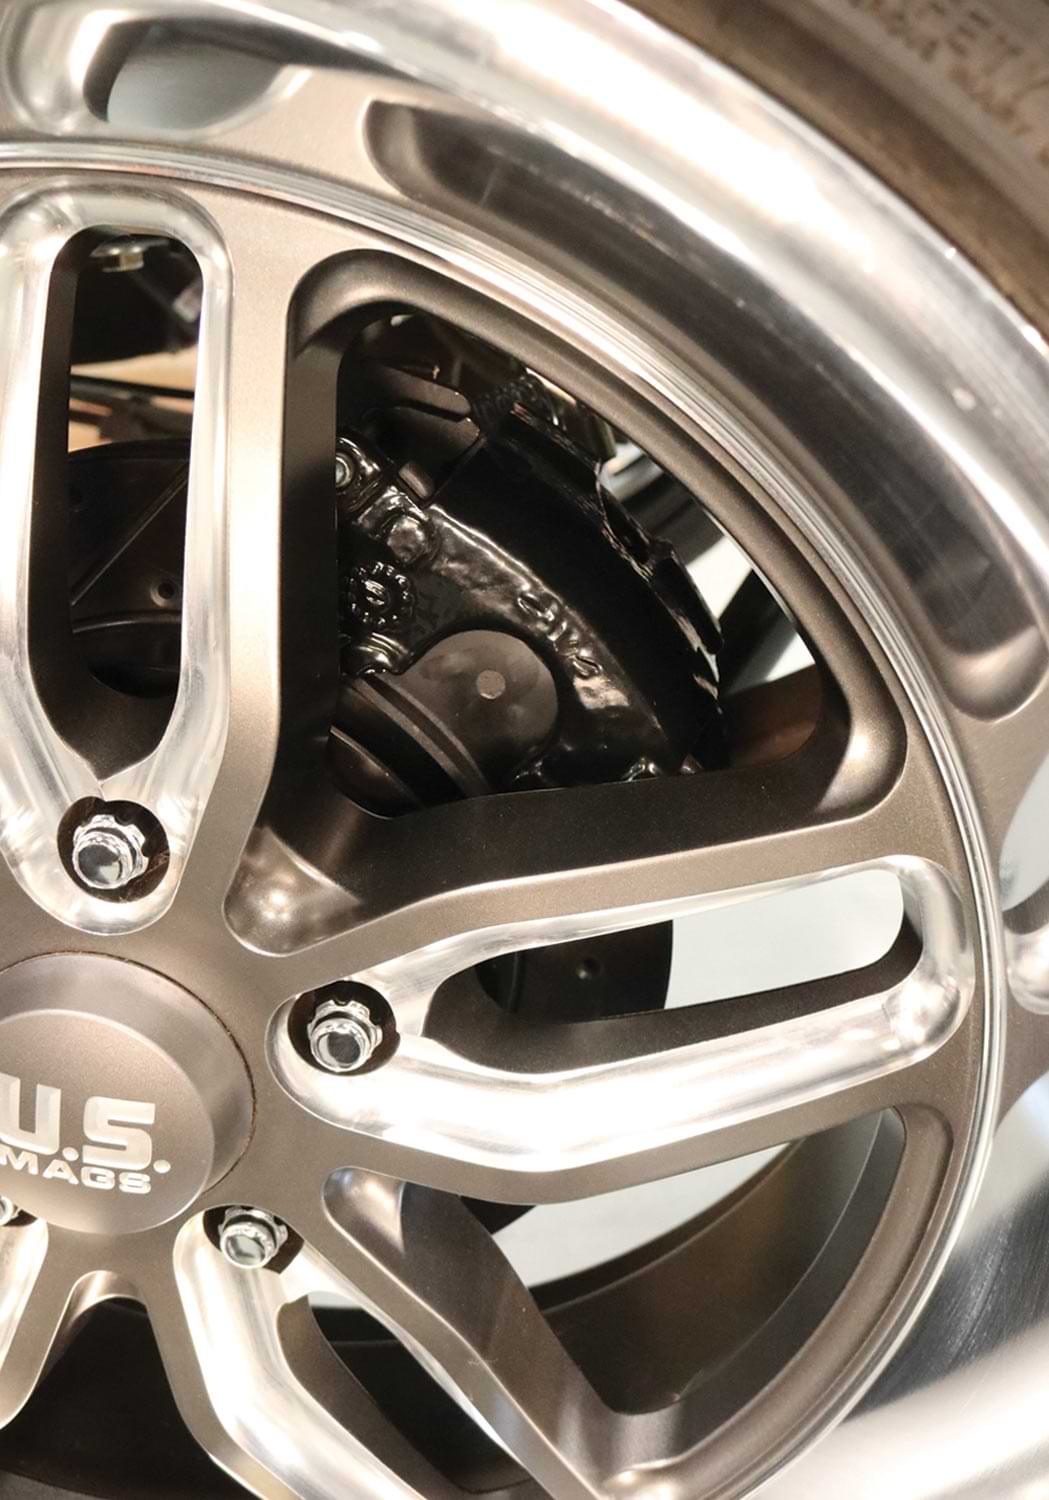 newly installed brakes covered with a 20-inch contrast-cut U.S. Mags rimmed tire